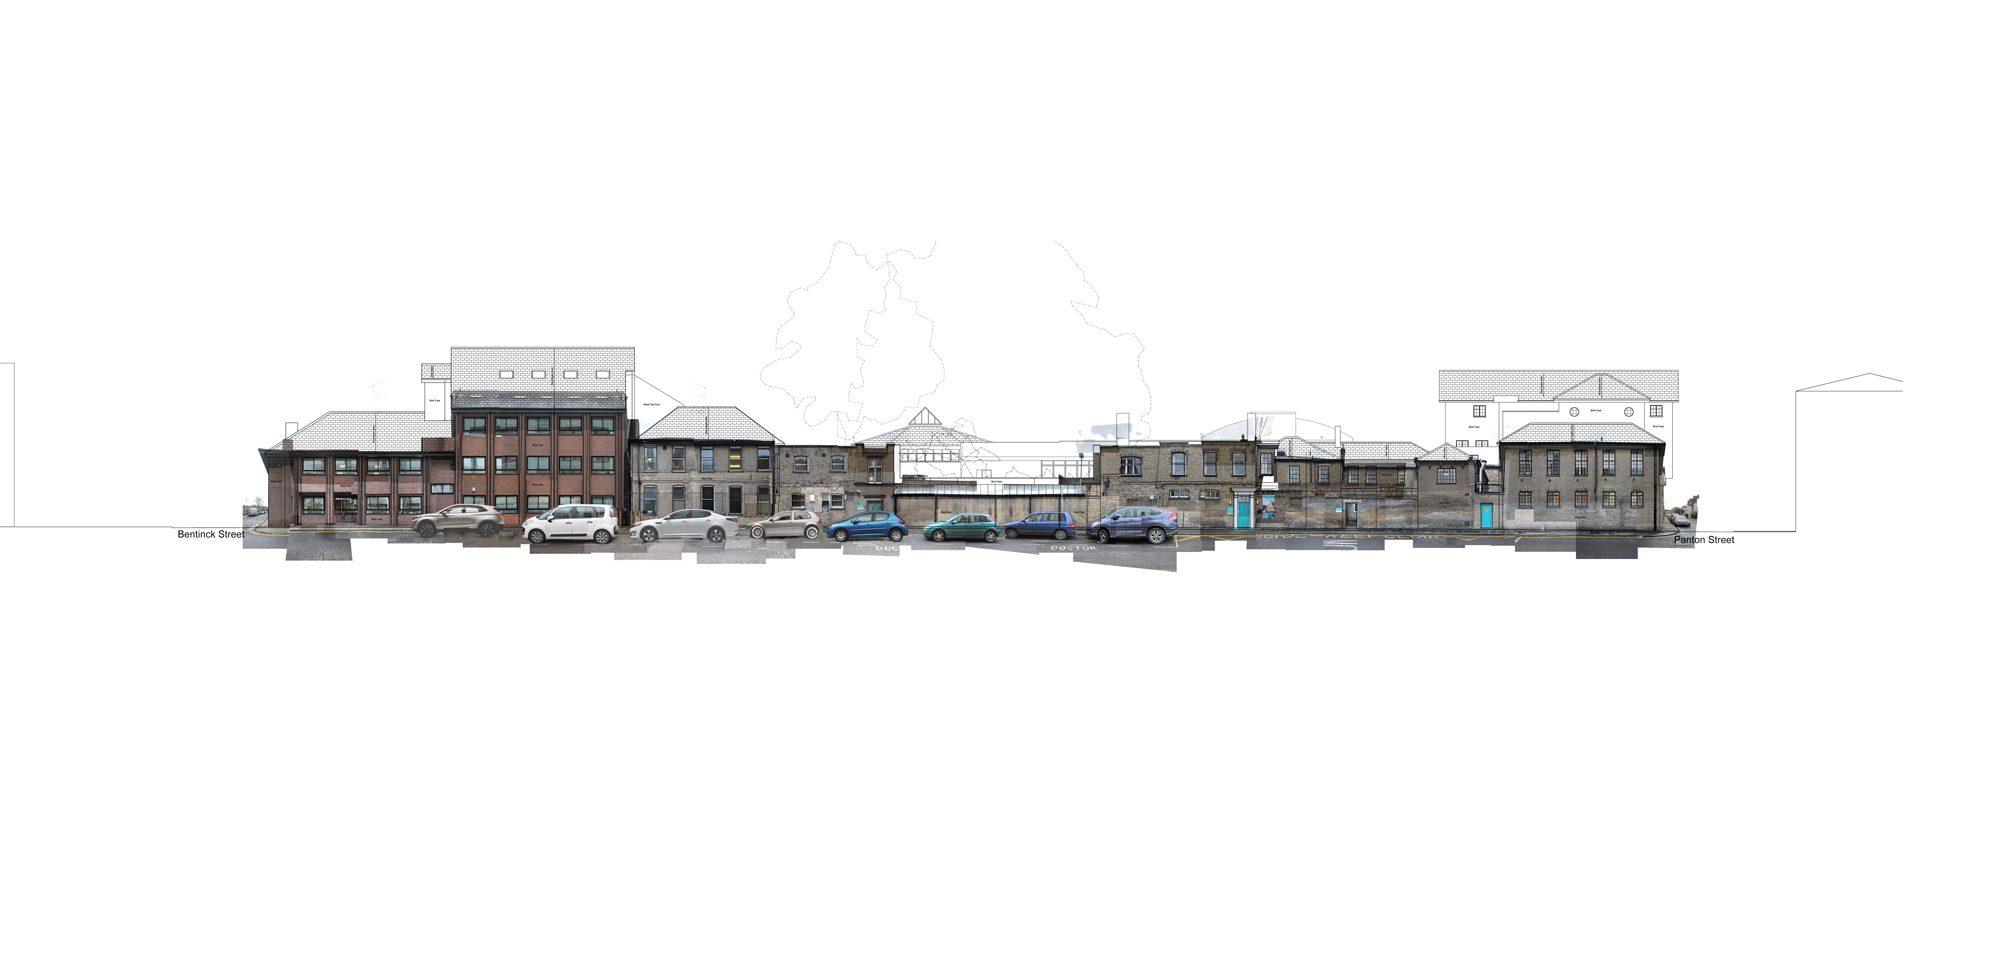 Elevation of the former union road layout in cambridge , by architects  CDC studio